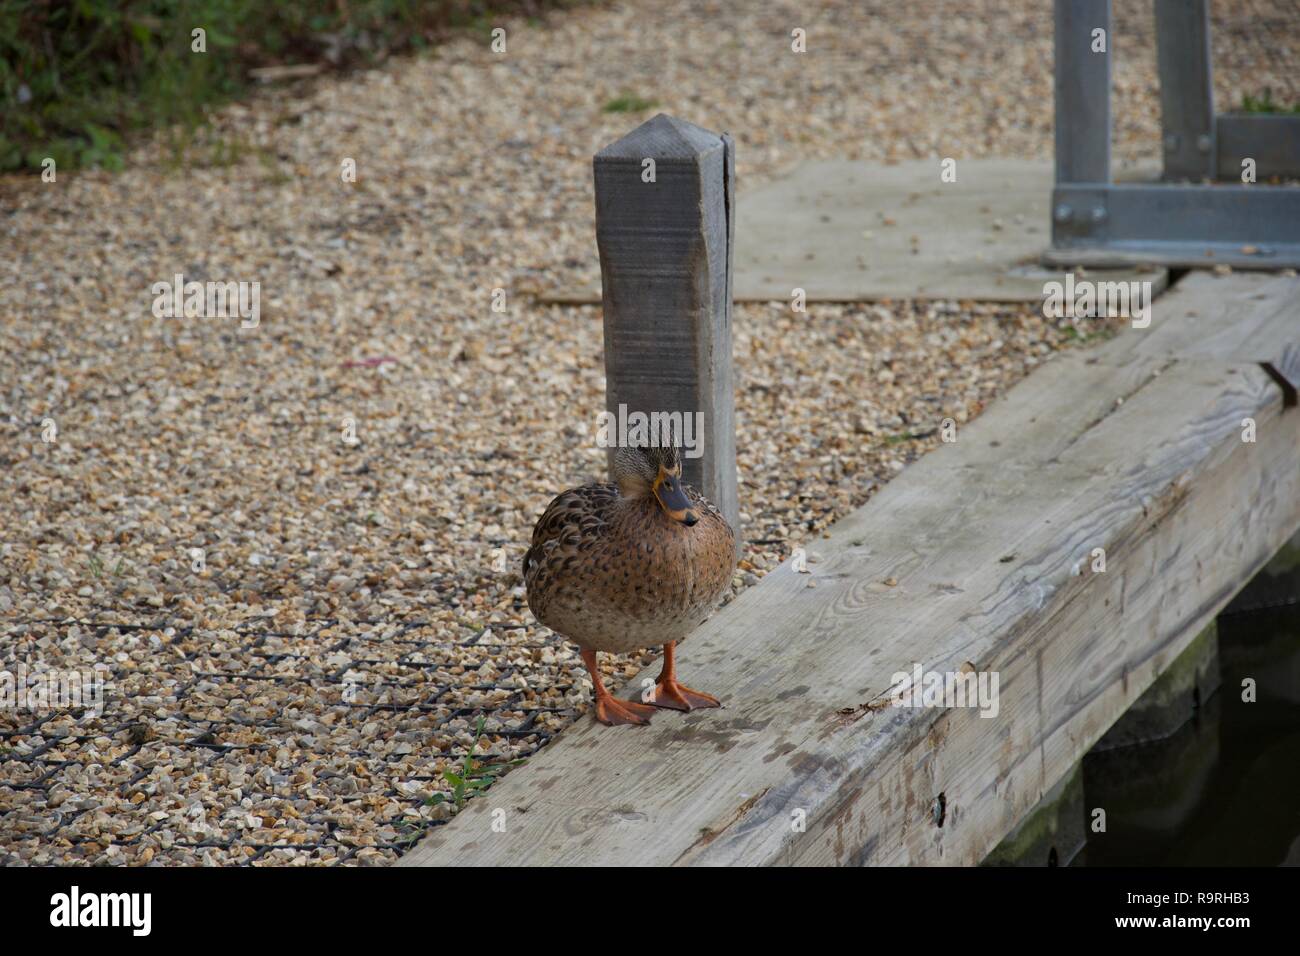 A speckled, female, English mallard duck standing by a post on the shore Stock Photo